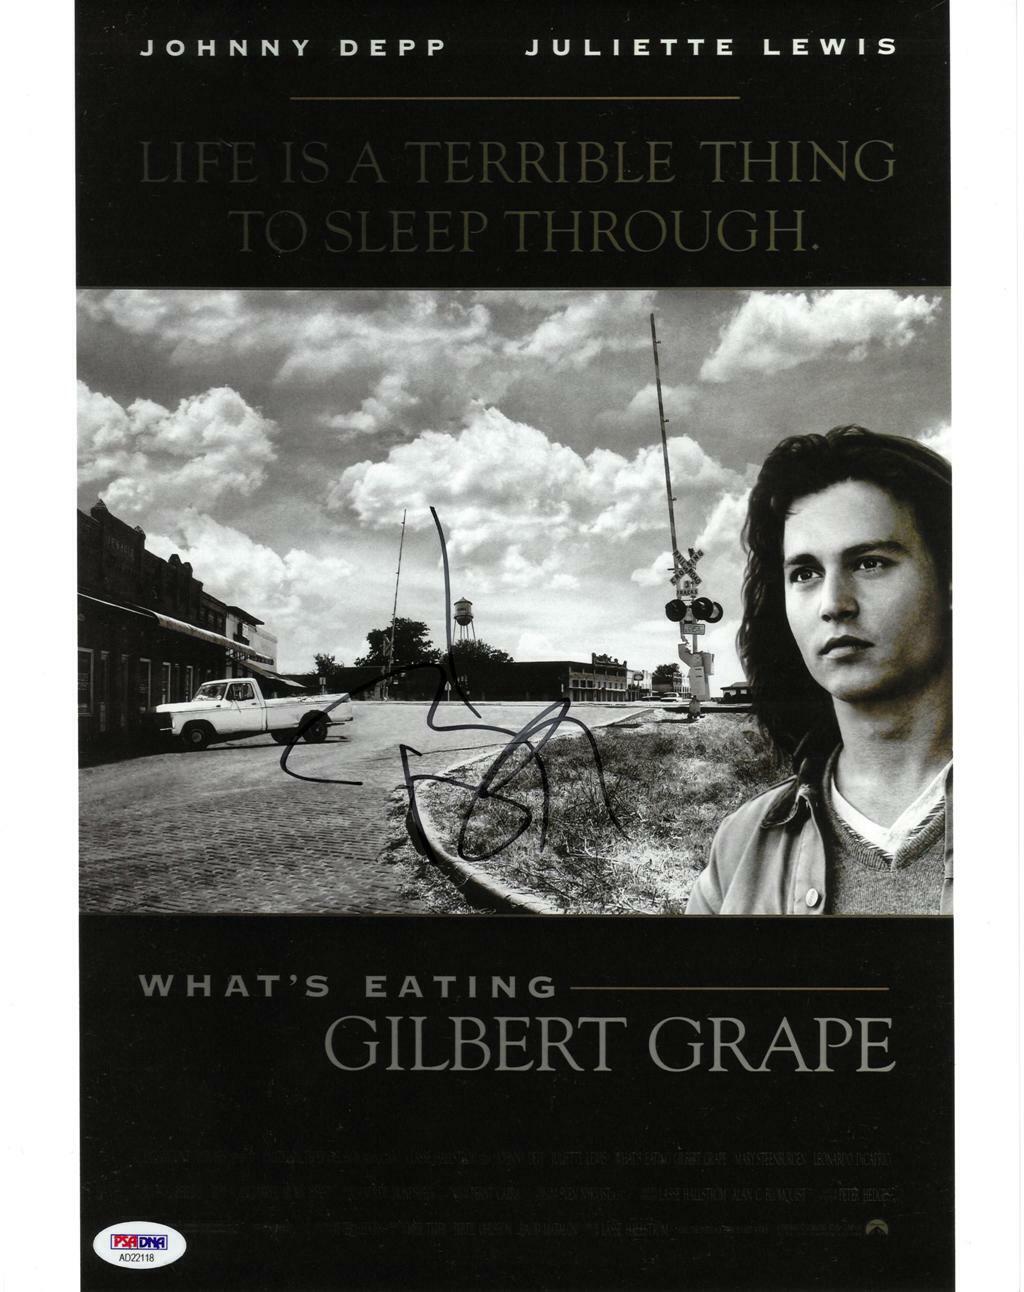 Johnny Depp Signed Whats Eating Gilbert Grape Auto 11x14 Photo Poster painting PSA/DNA #AD22118